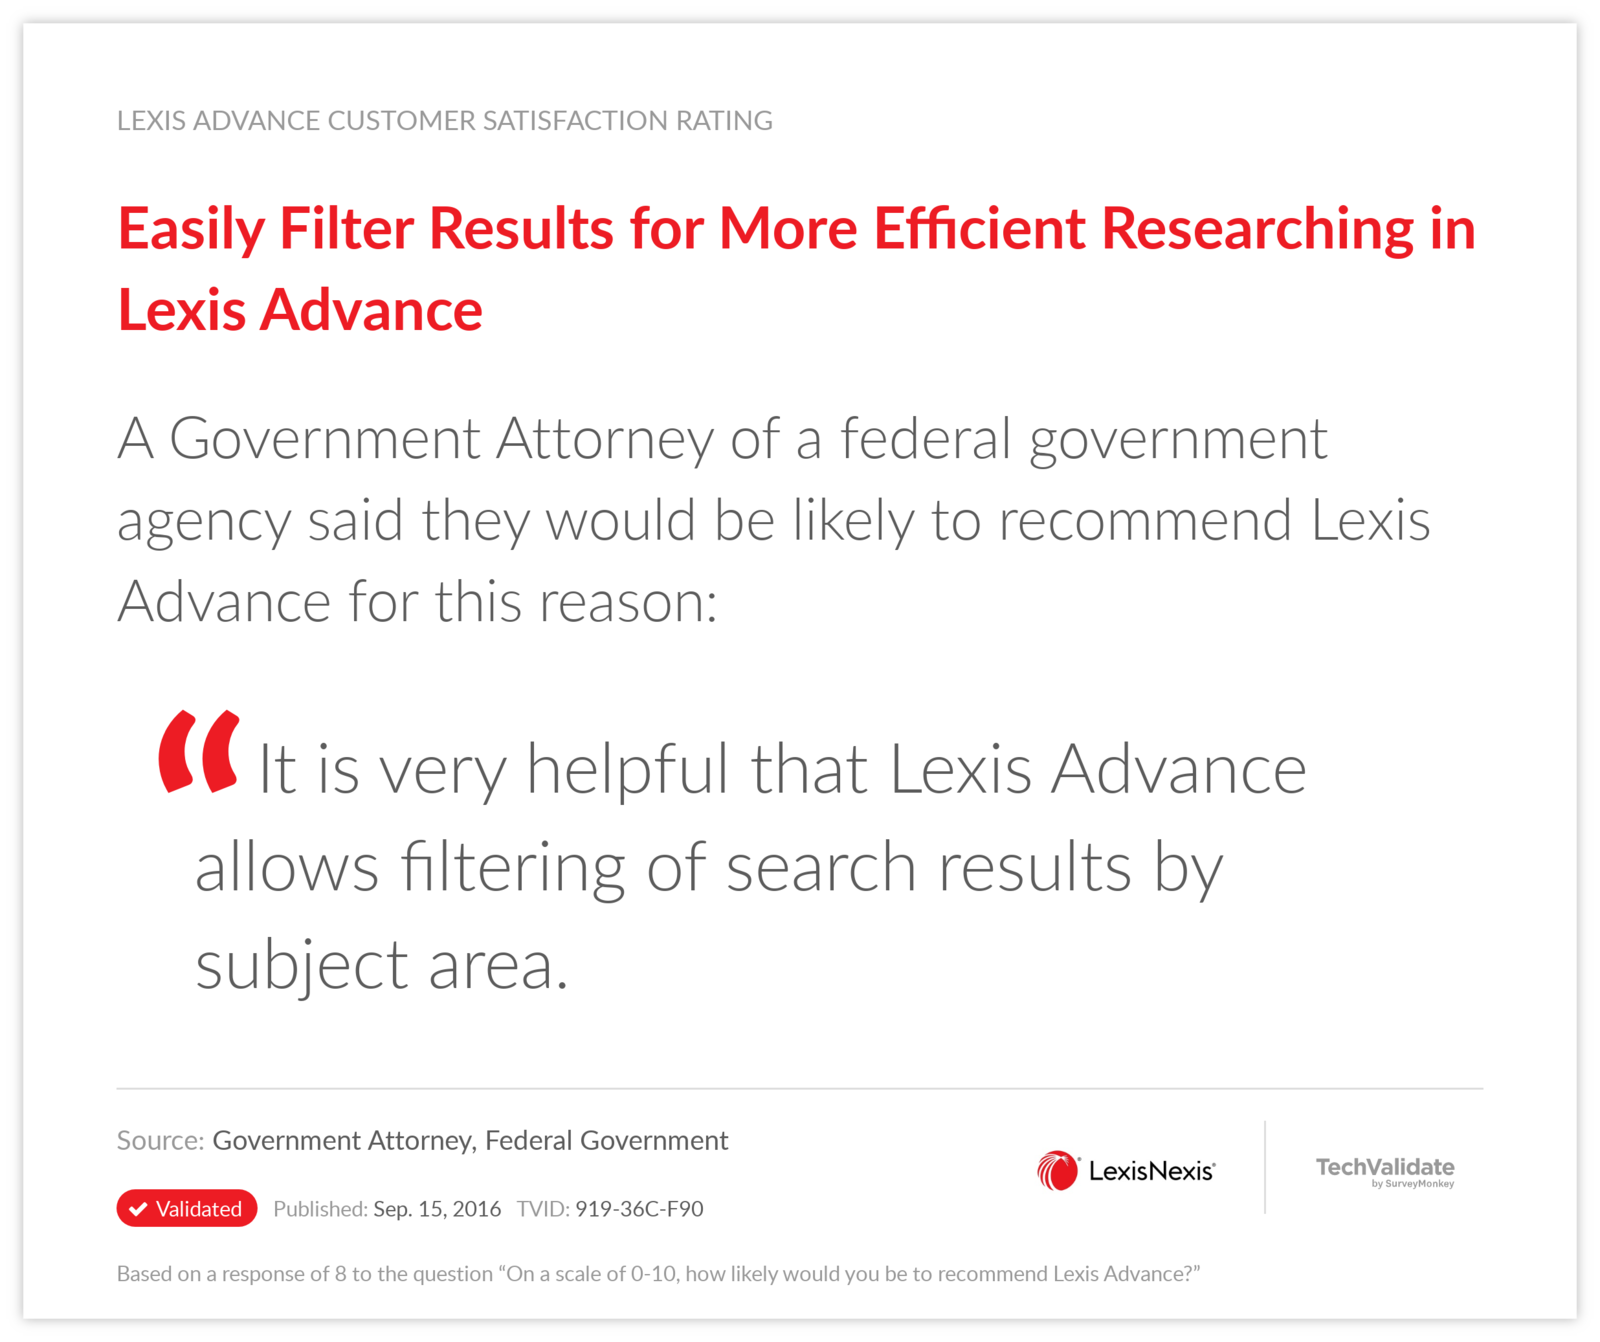 Easily Filter Results for More Efficient Researching in Lexis Advance